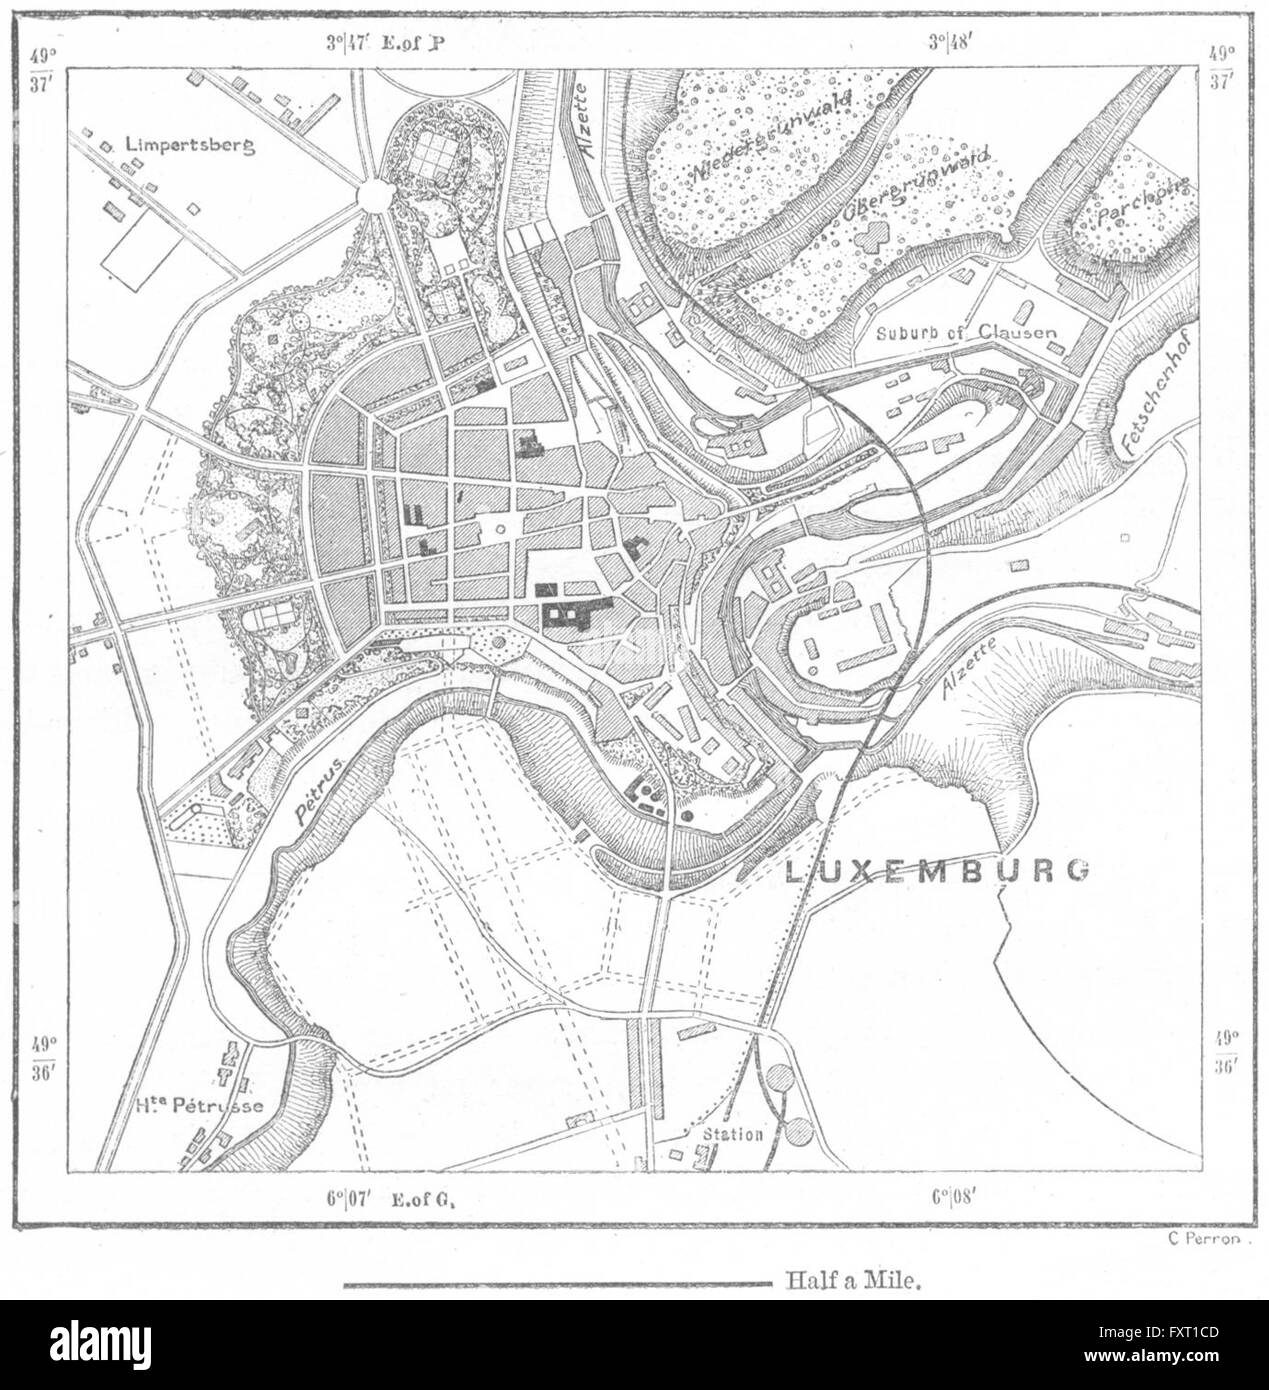 LUXEMBOURG: Luxemburg, sketch map, c1885 Stock Photo